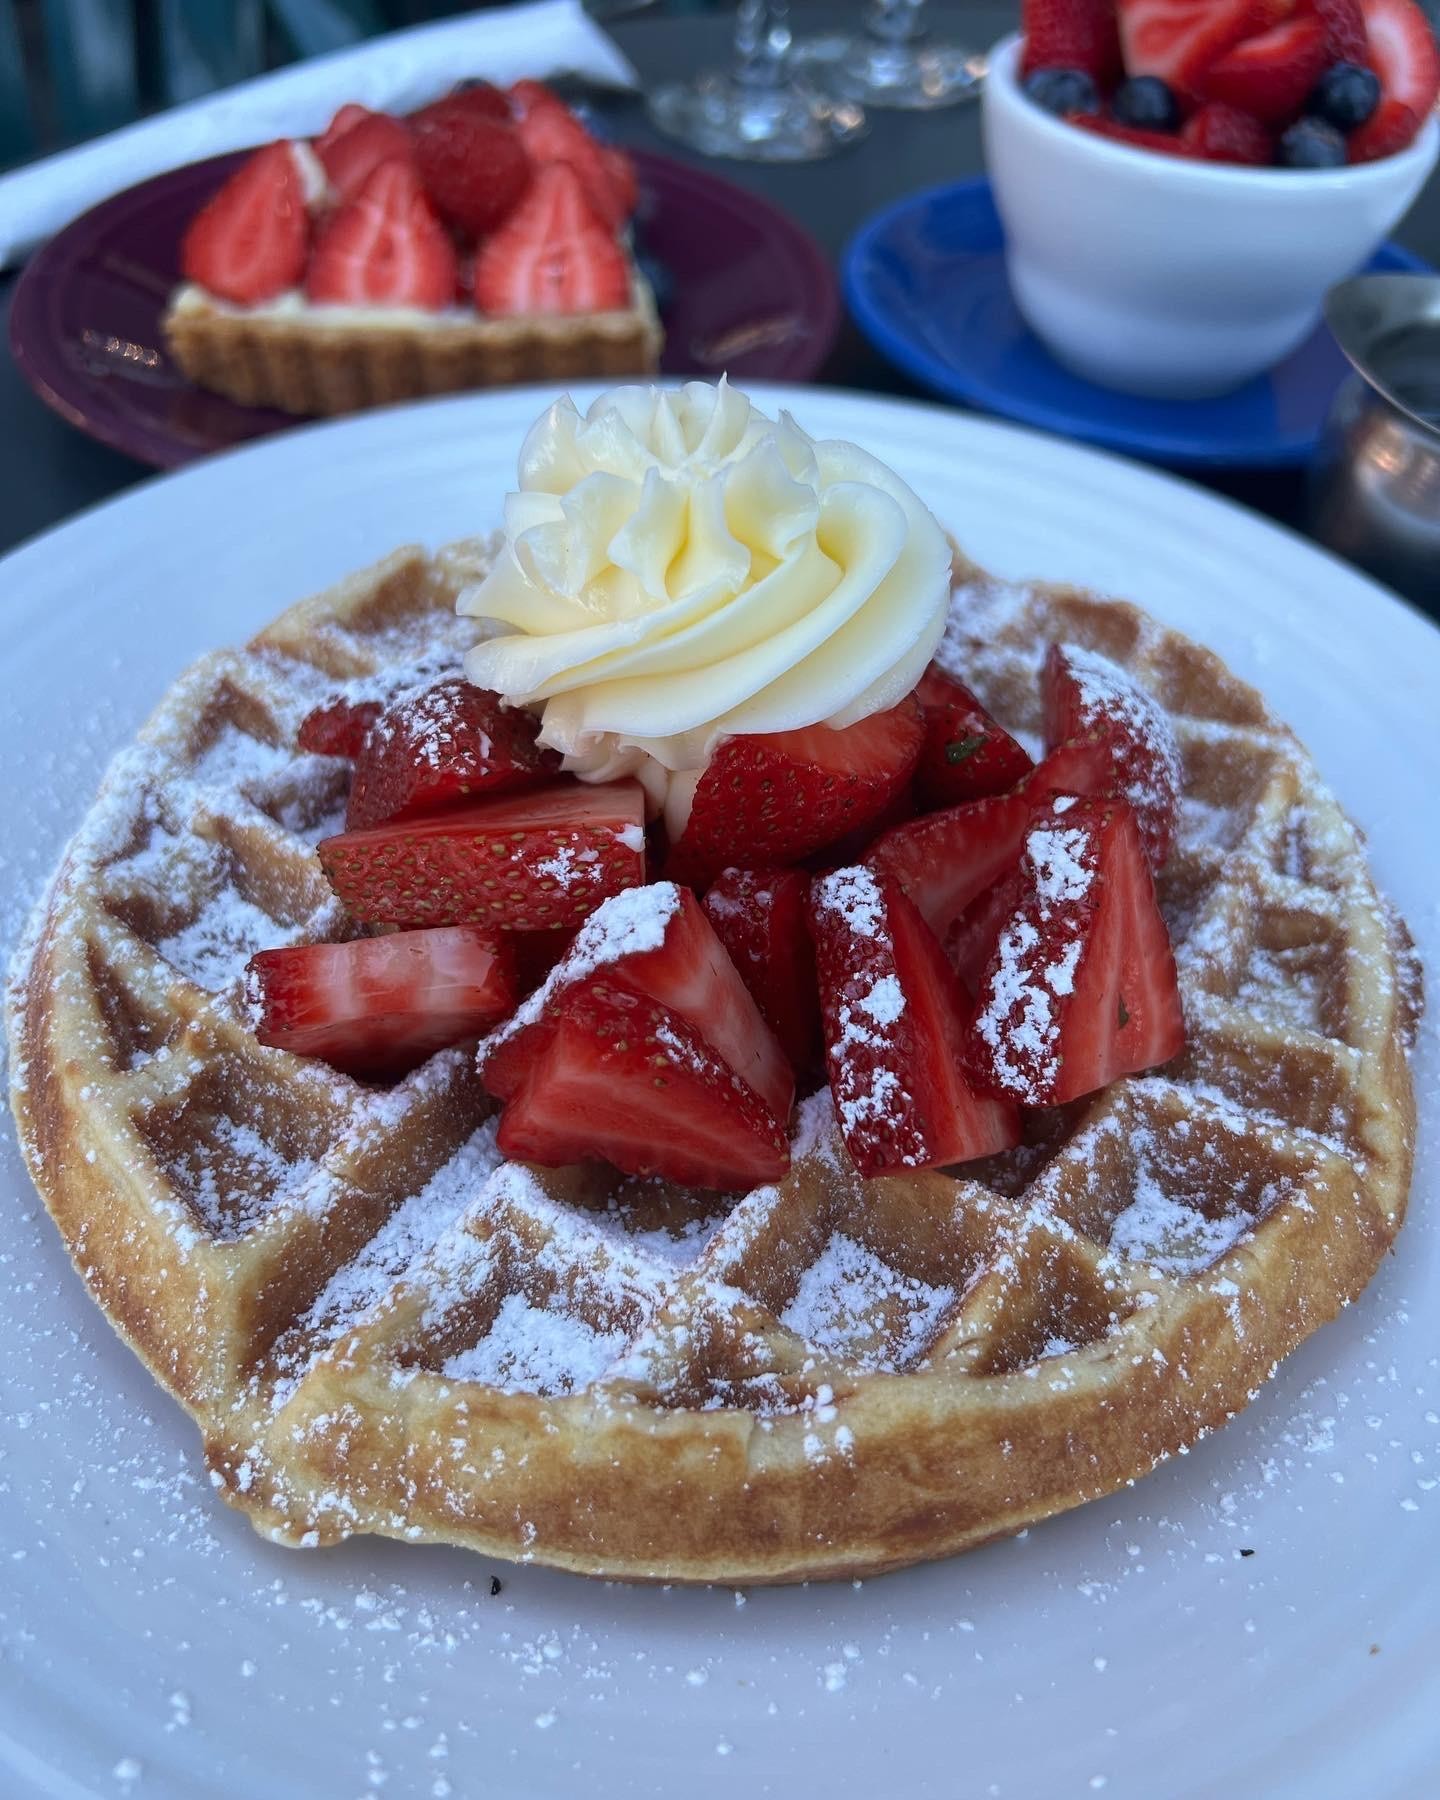 Waffle topped with Organic Strawberries